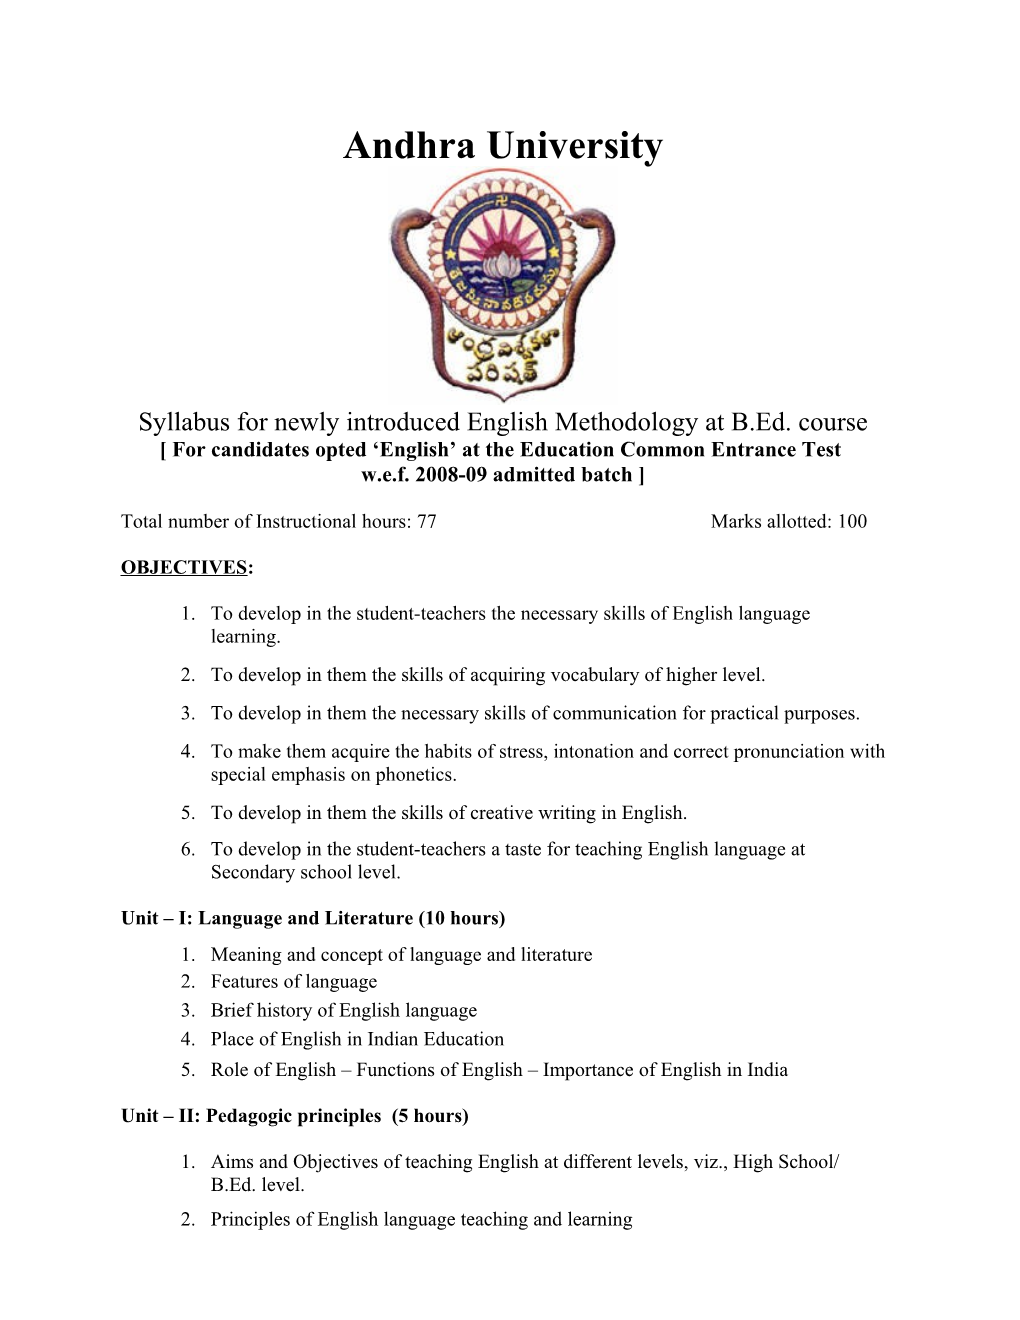 Syllabus for Newly Introduced English Methodology at B